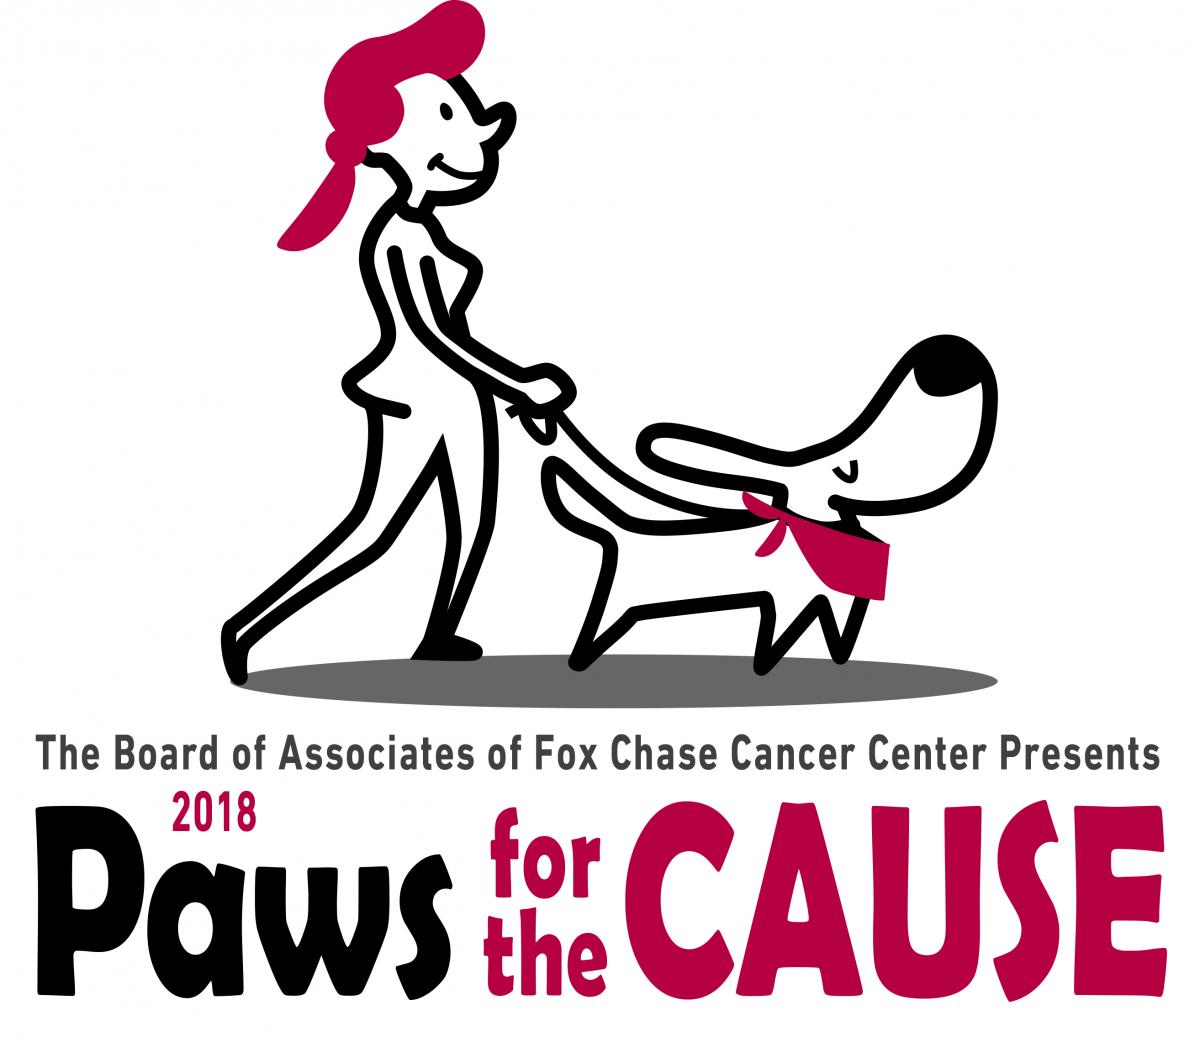 Paws for the Cause October 21, 2018 | 9 AM - Noon